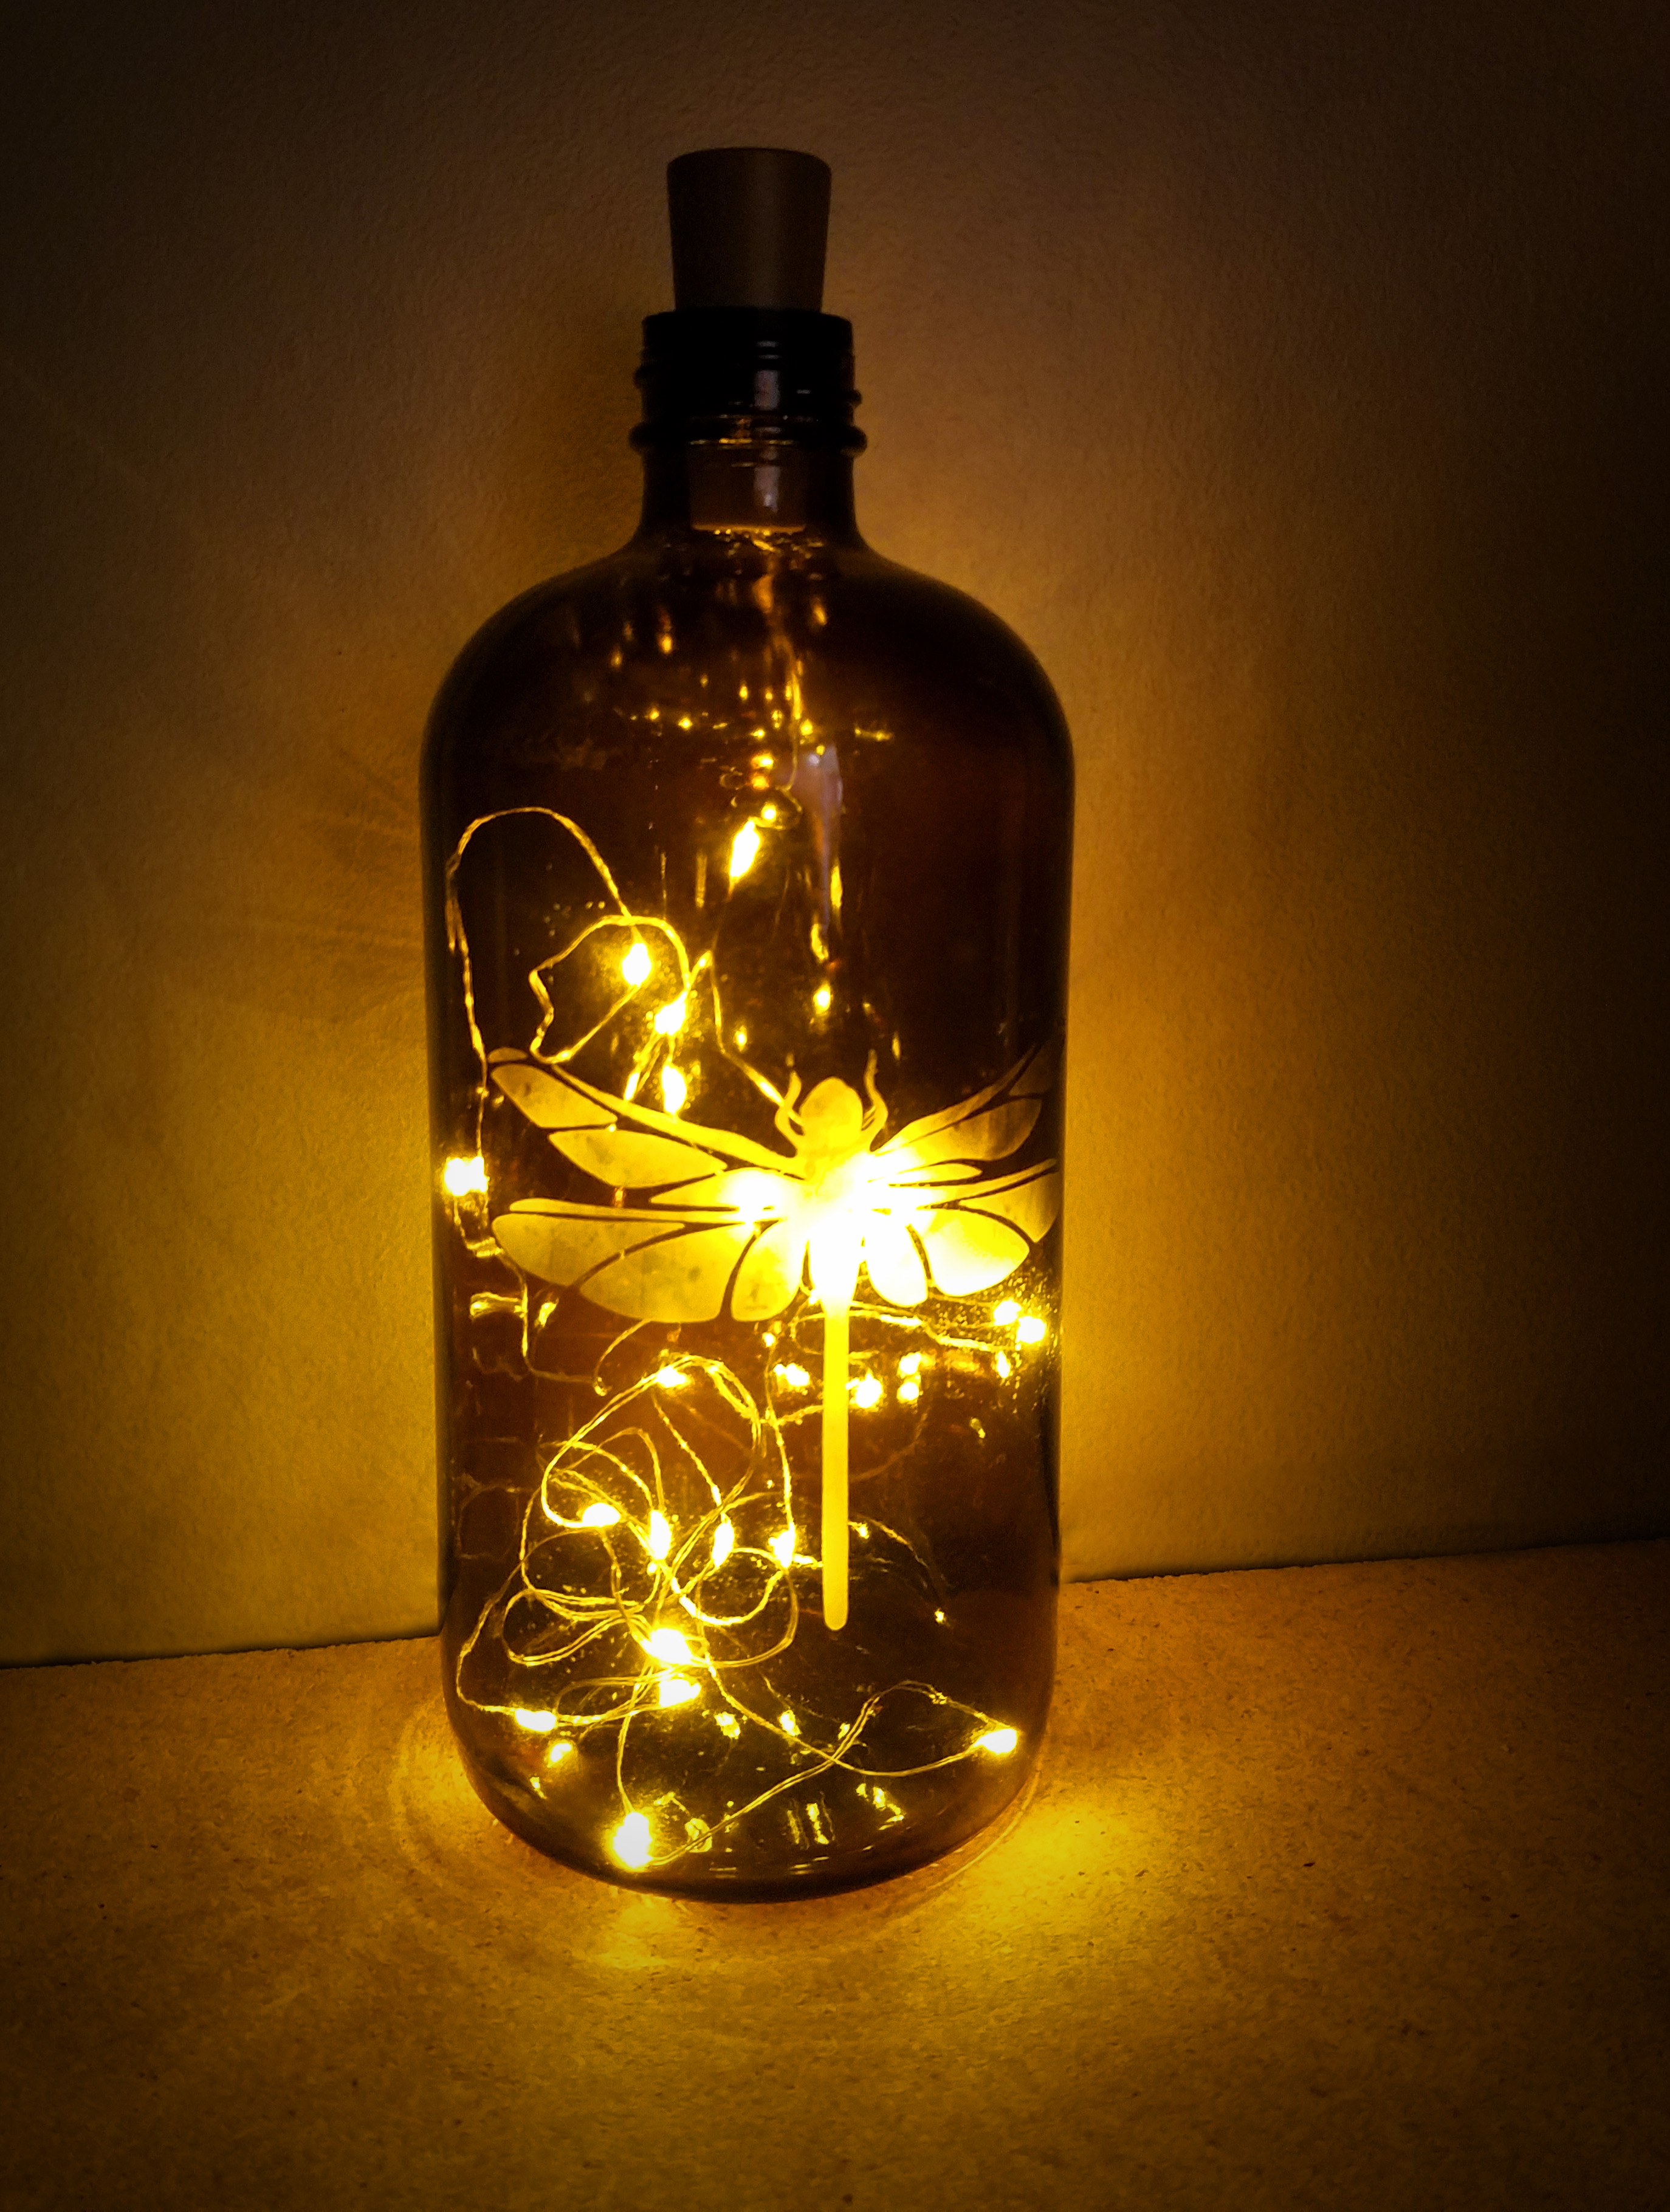 Brown glass bottle with etched dragonfly and string lights glowing inside